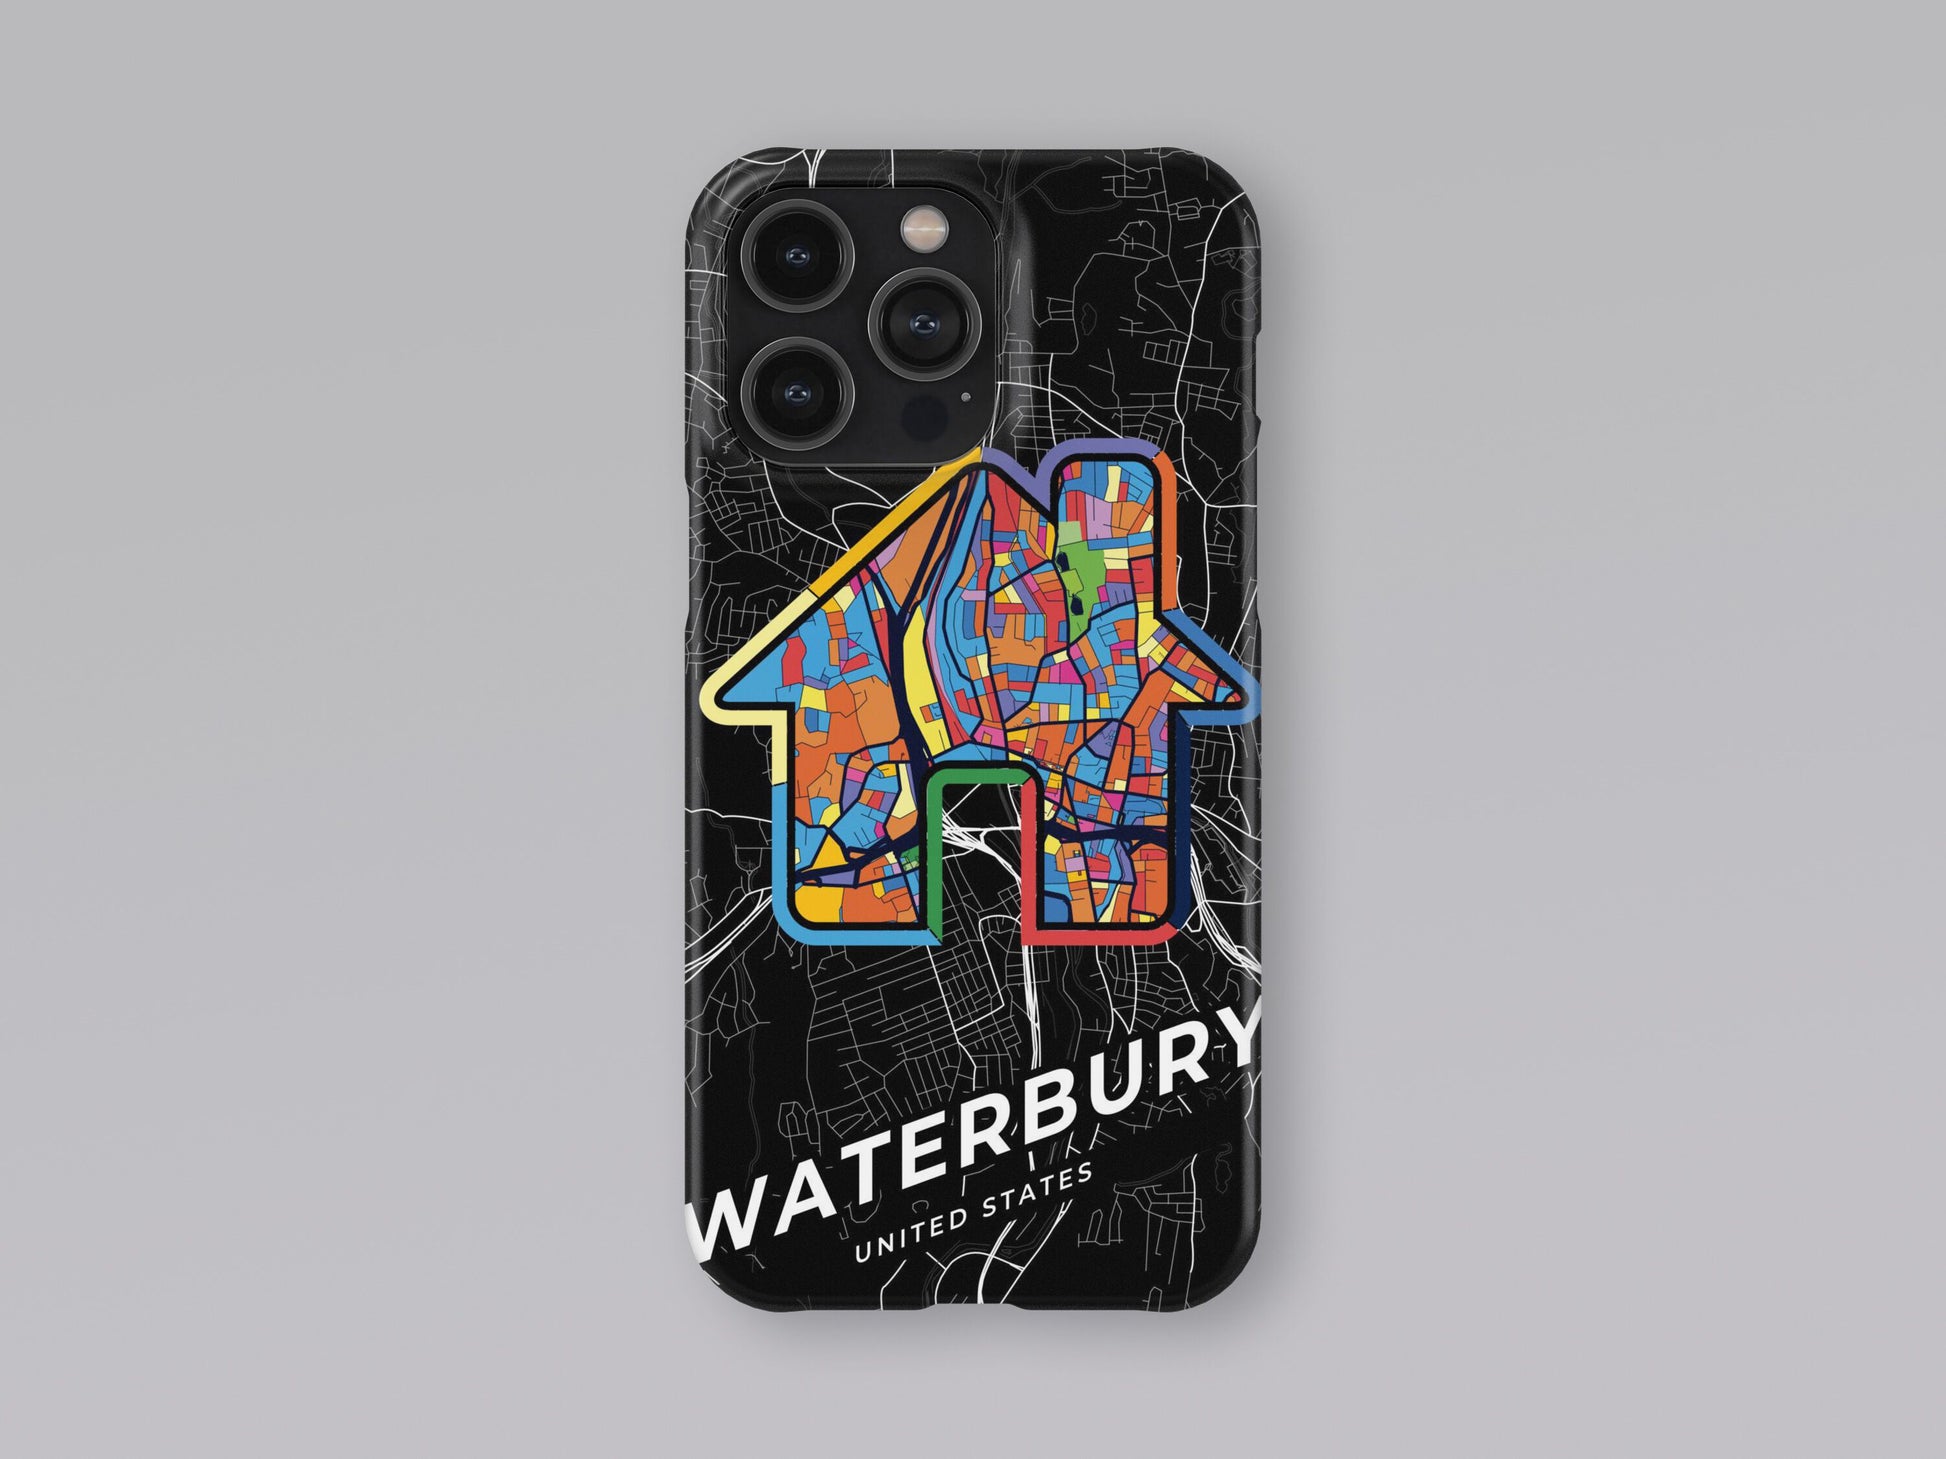 Waterbury Connecticut slim phone case with colorful icon 3